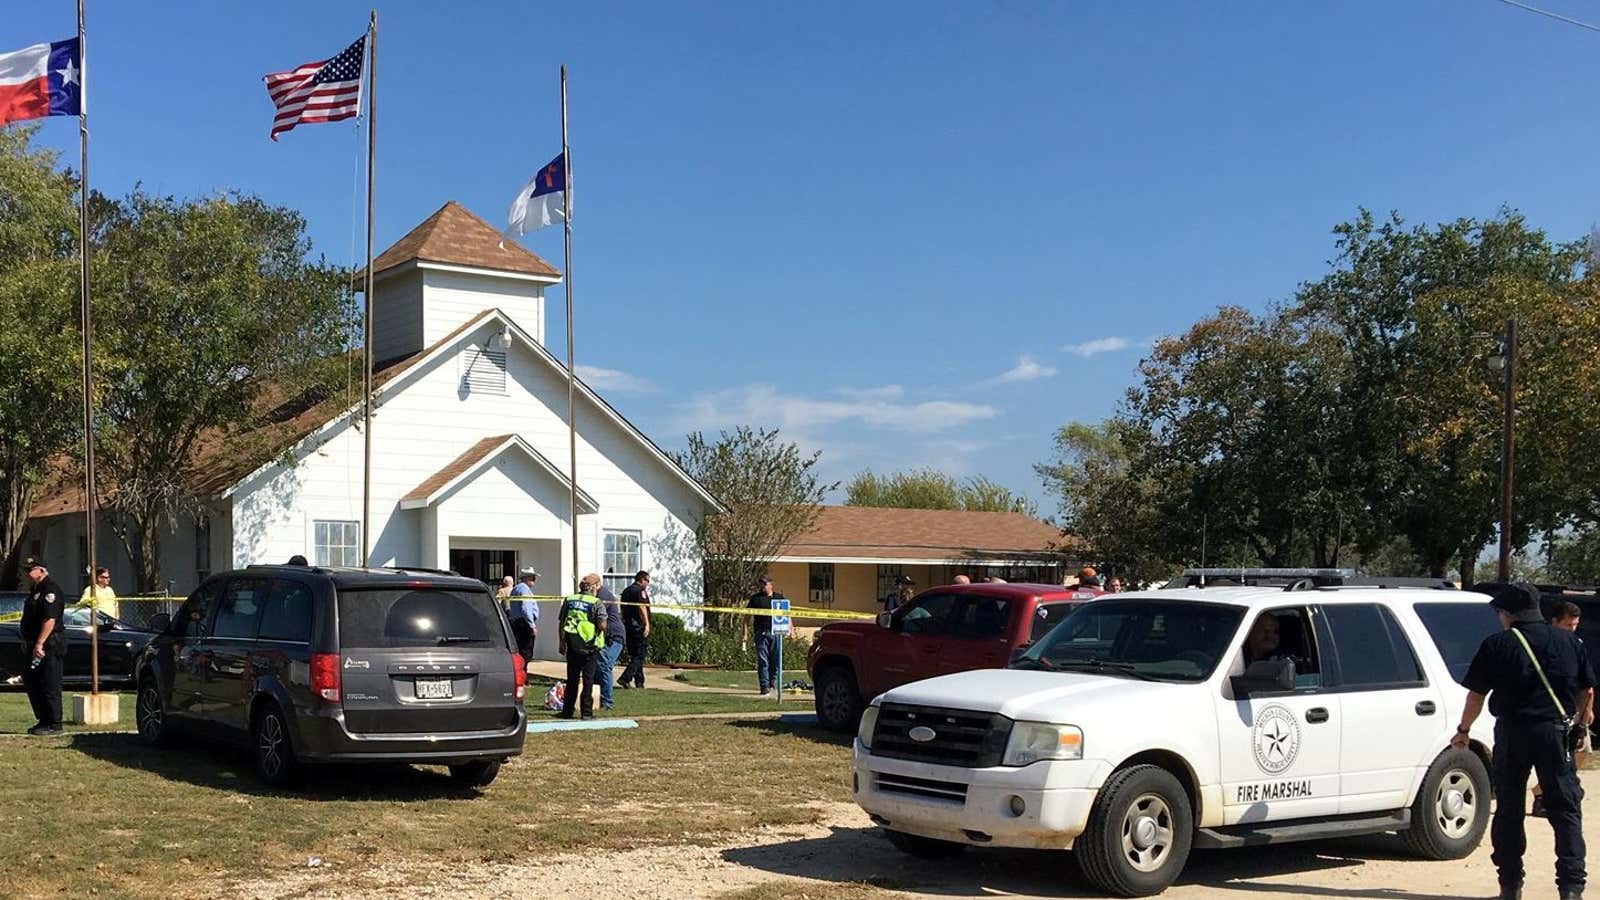 Today’s church shooting in Texas follows too many like it.